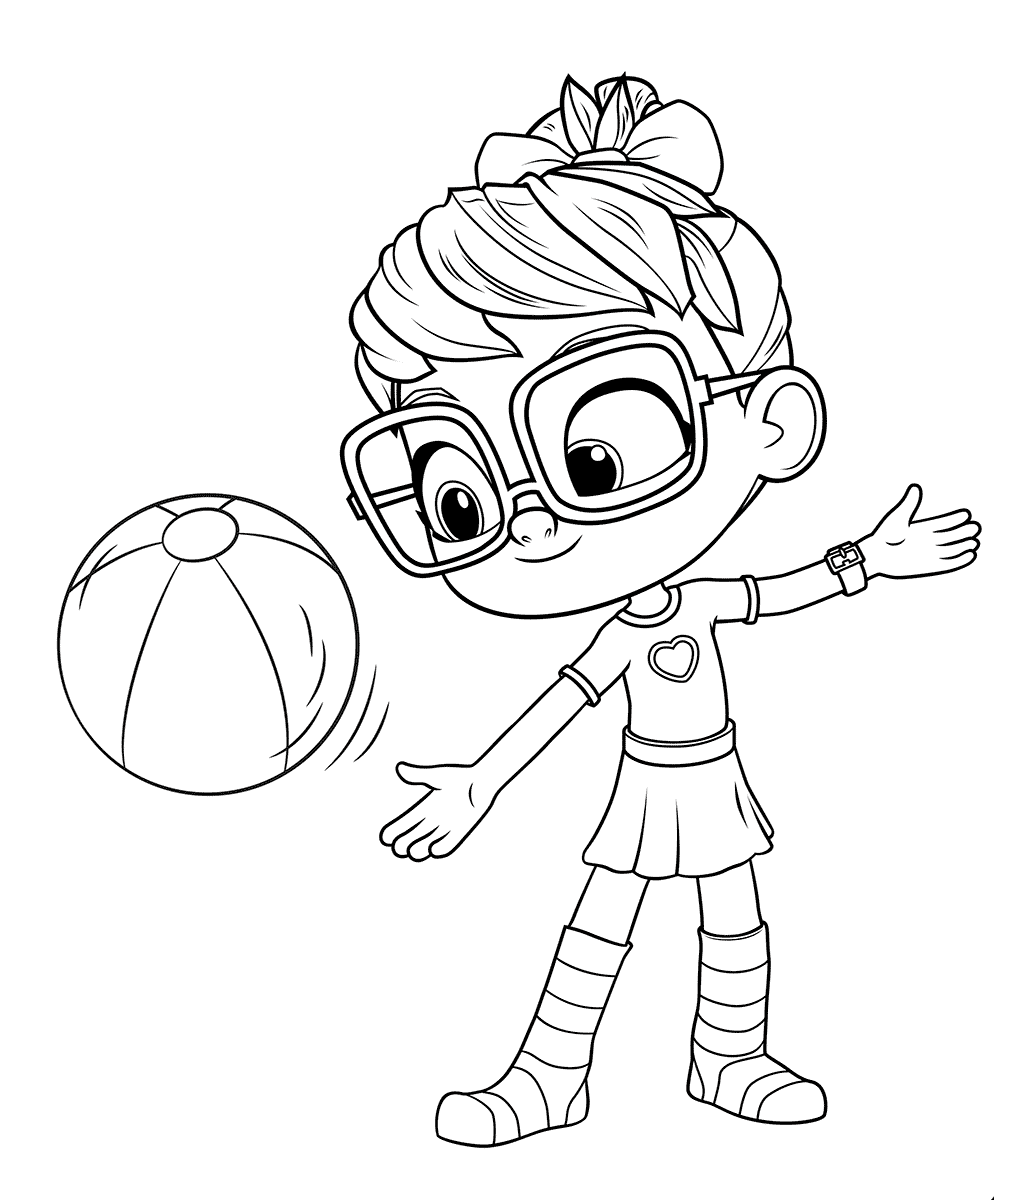 Abby Hatcher coloring pages printable